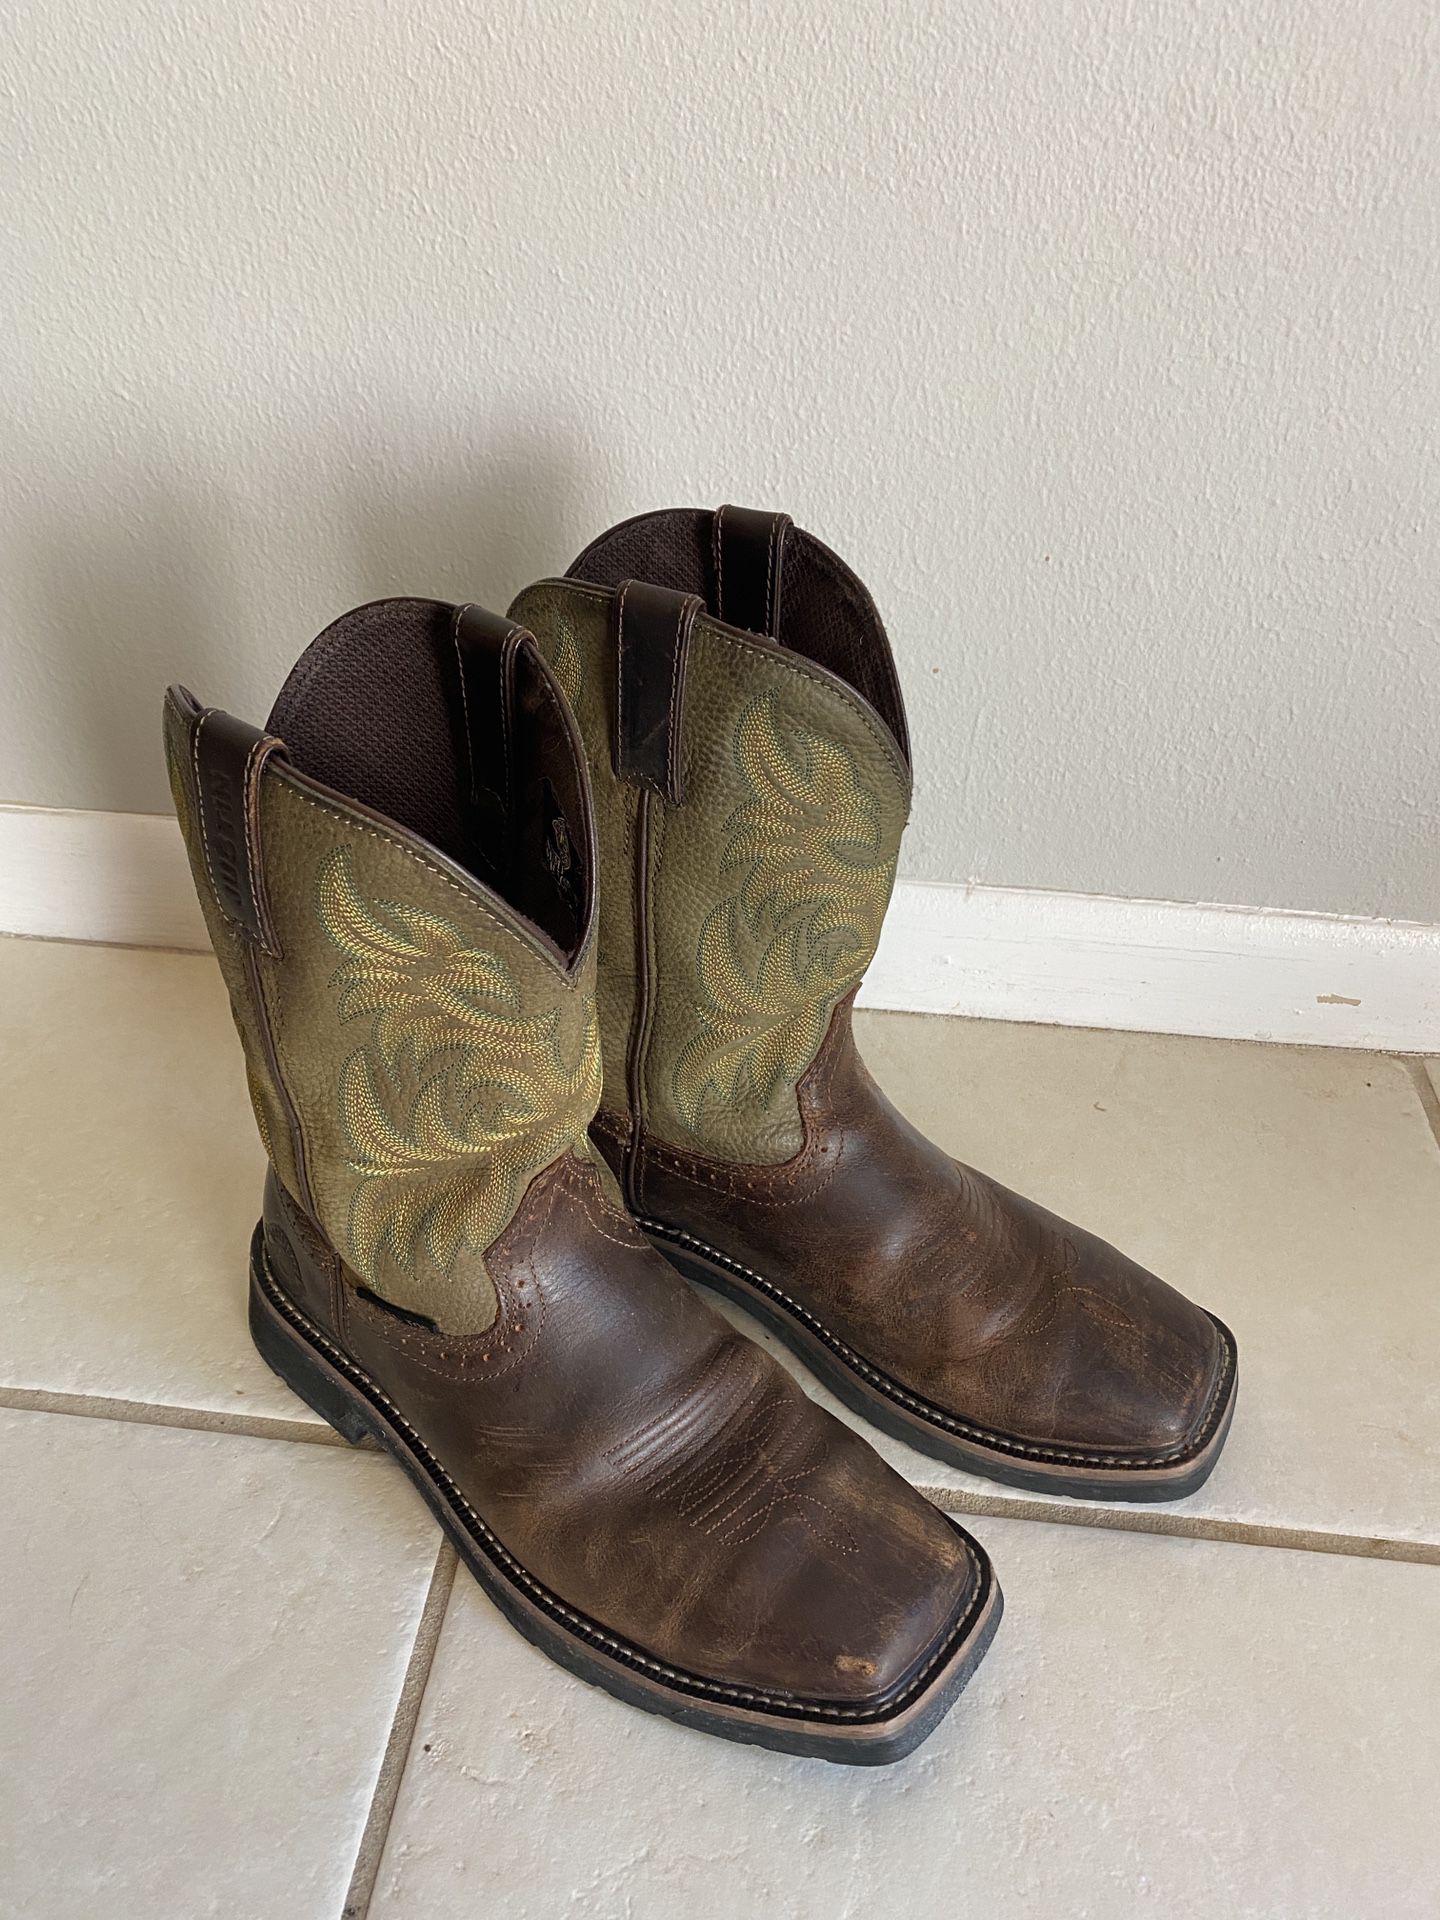 Steel Toe Boots, Work Boots, Cowboy Boots 